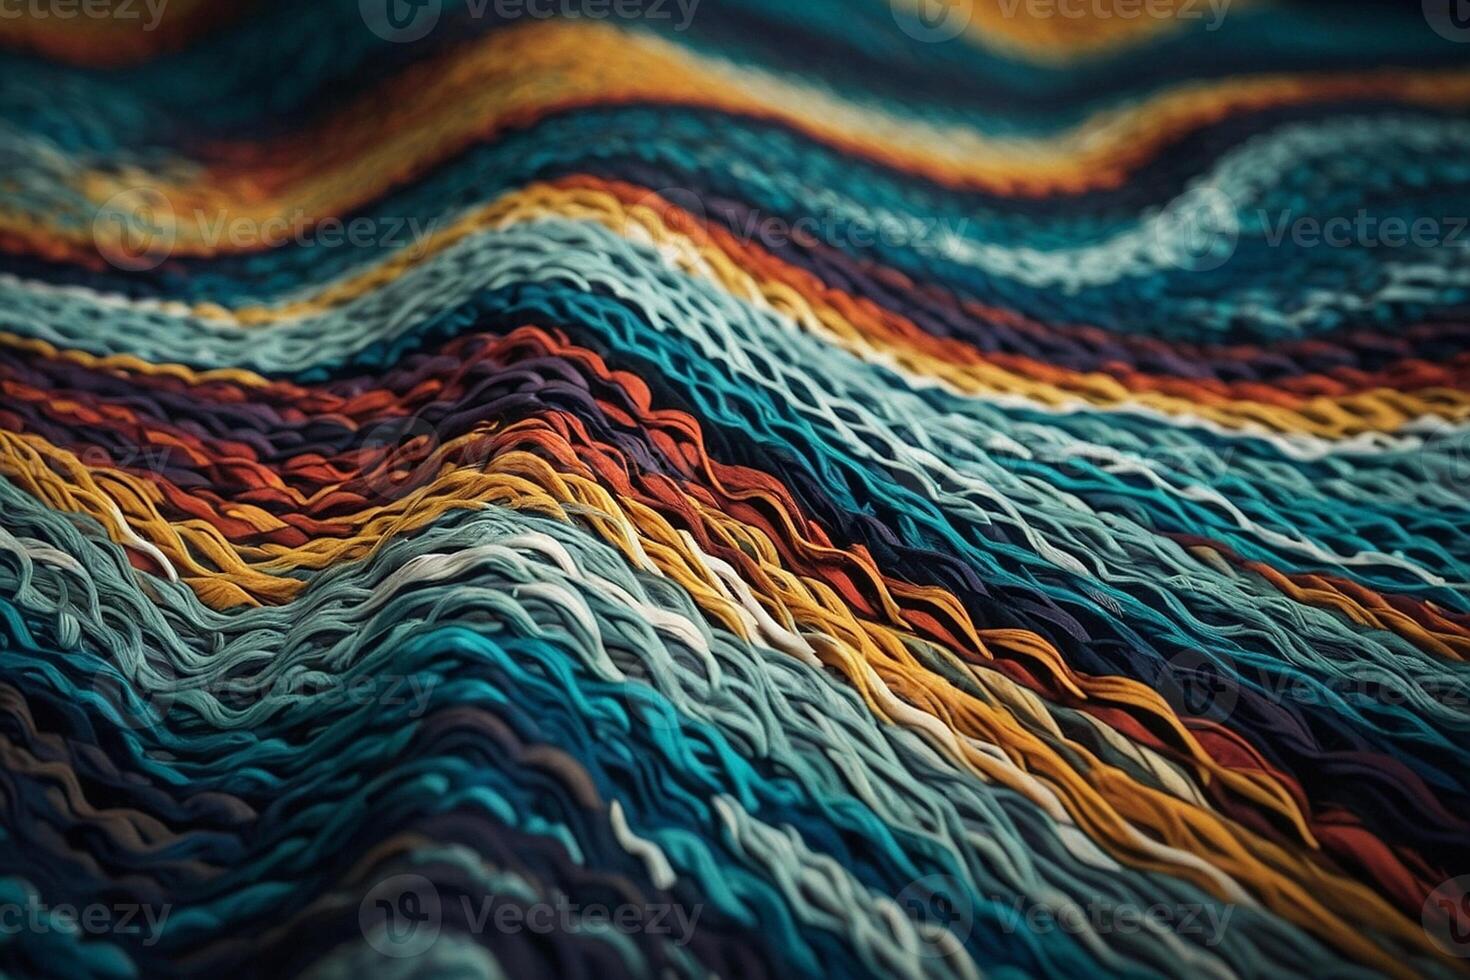 AI generated a close up of a colorful, wavy knit fabric photo